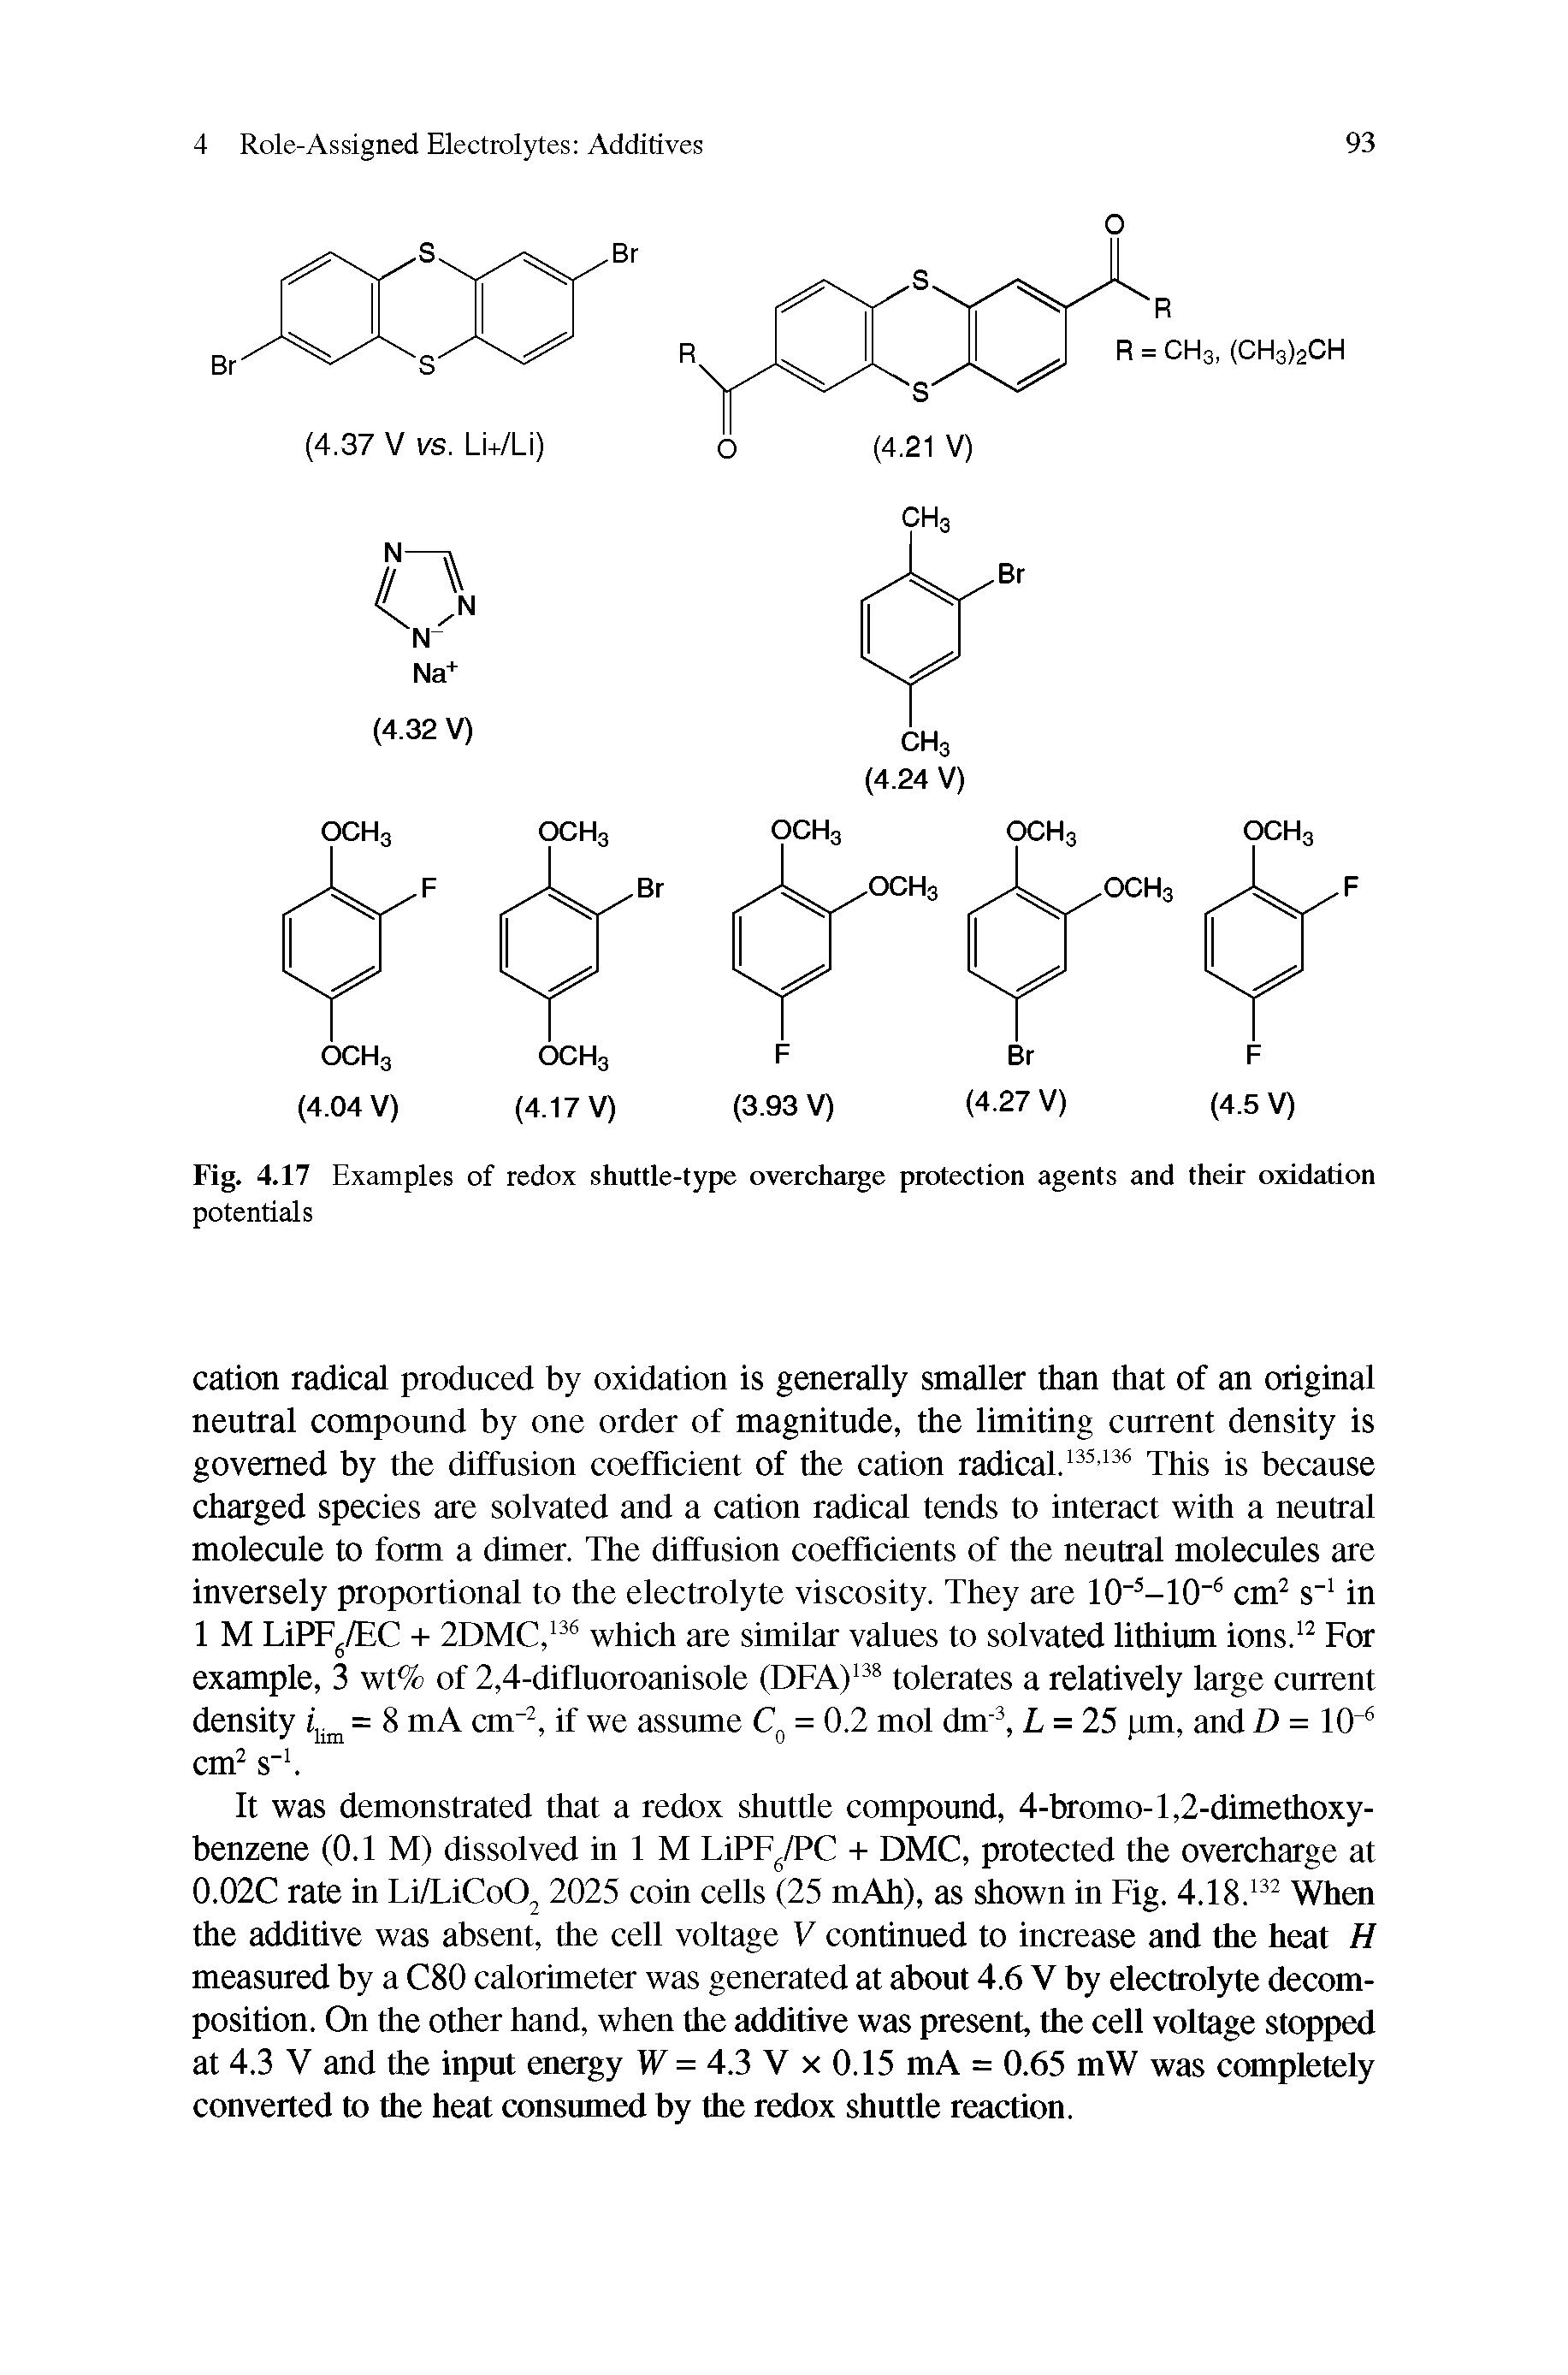 Fig. 4.17 Examples of redox shuttle-type overcharge protection agents and their oxidation potentials...